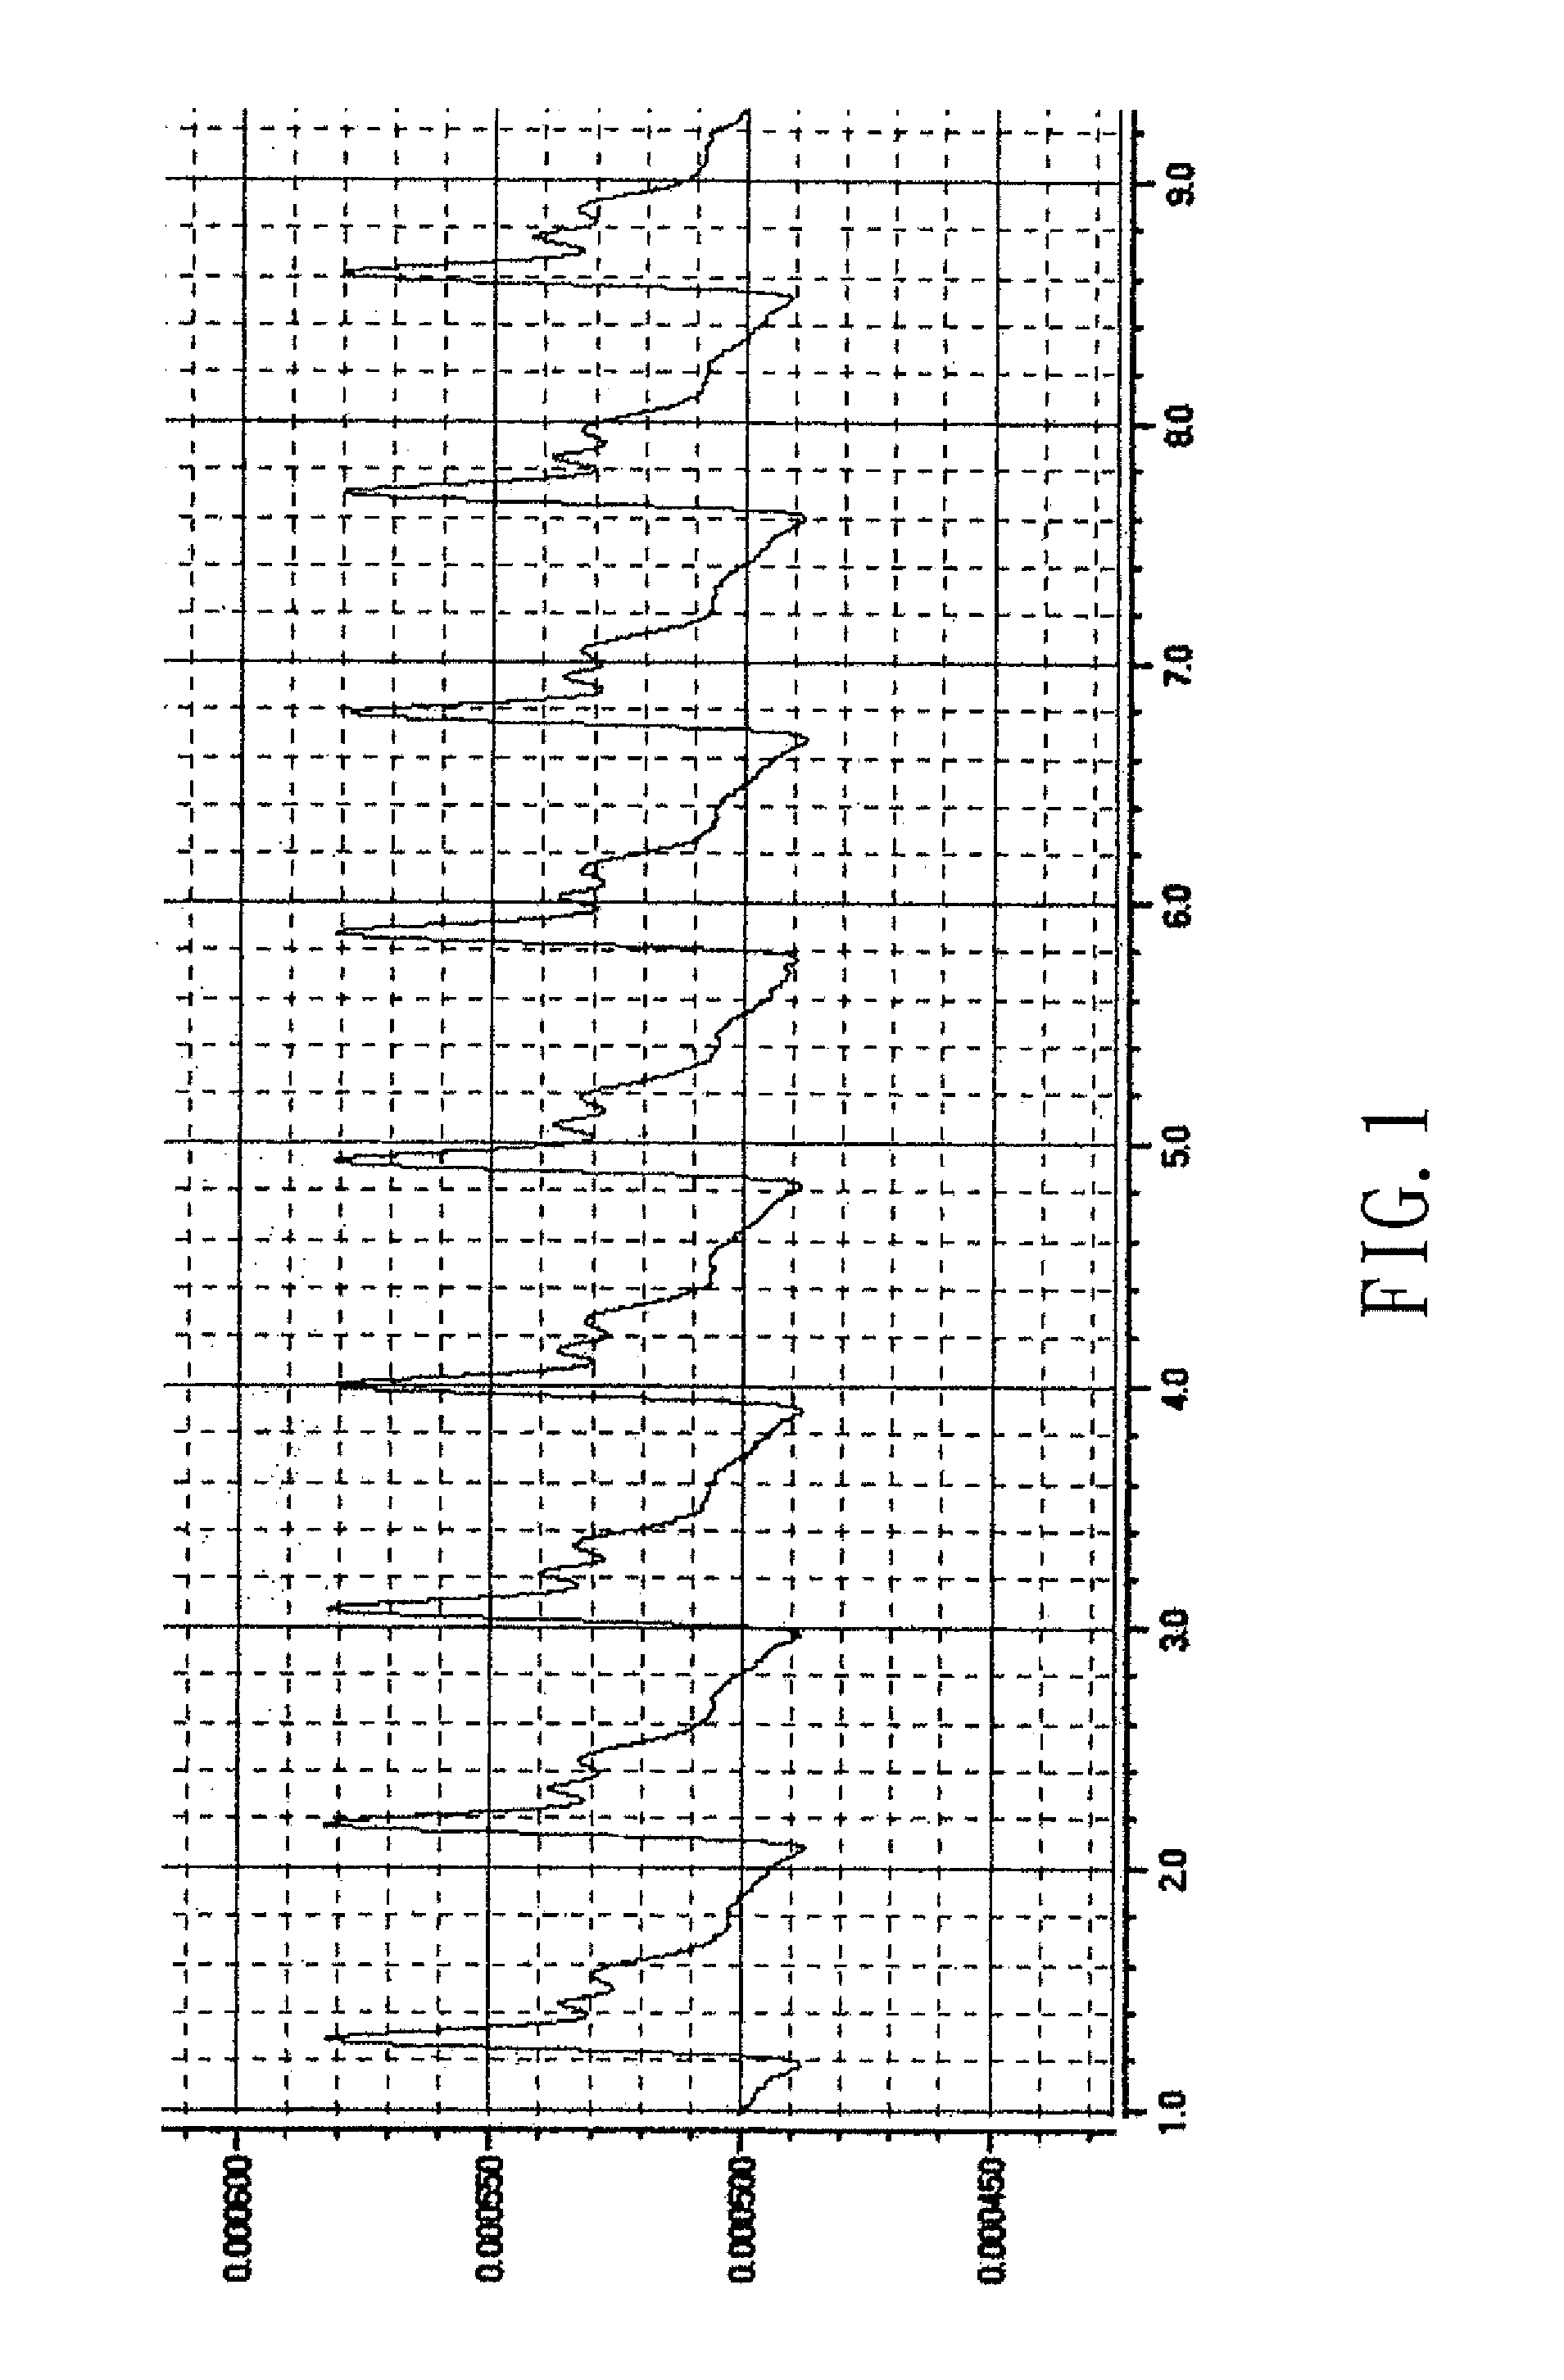 Pulse Taking and Spectral Analysis and Display Instrument